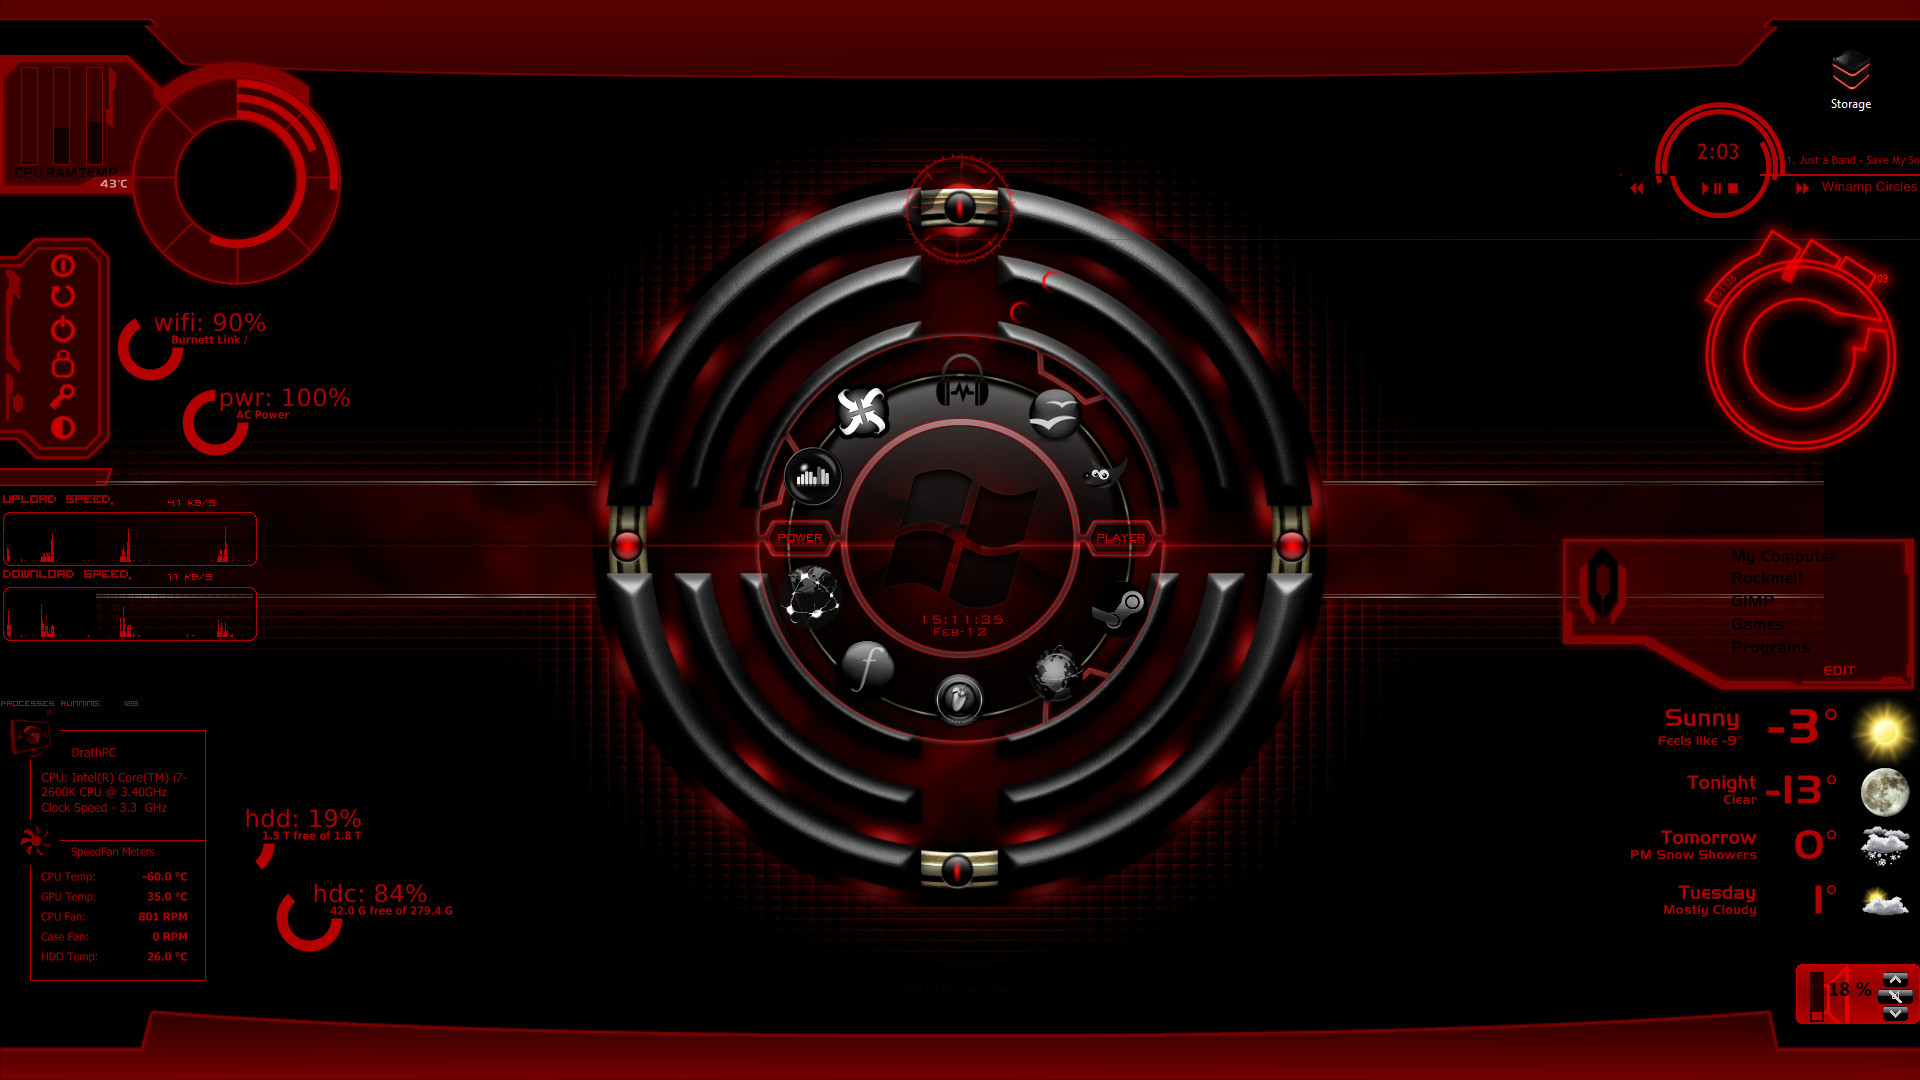 1920x1080 ... Black and Red Windows 7 Theme by Dratheus